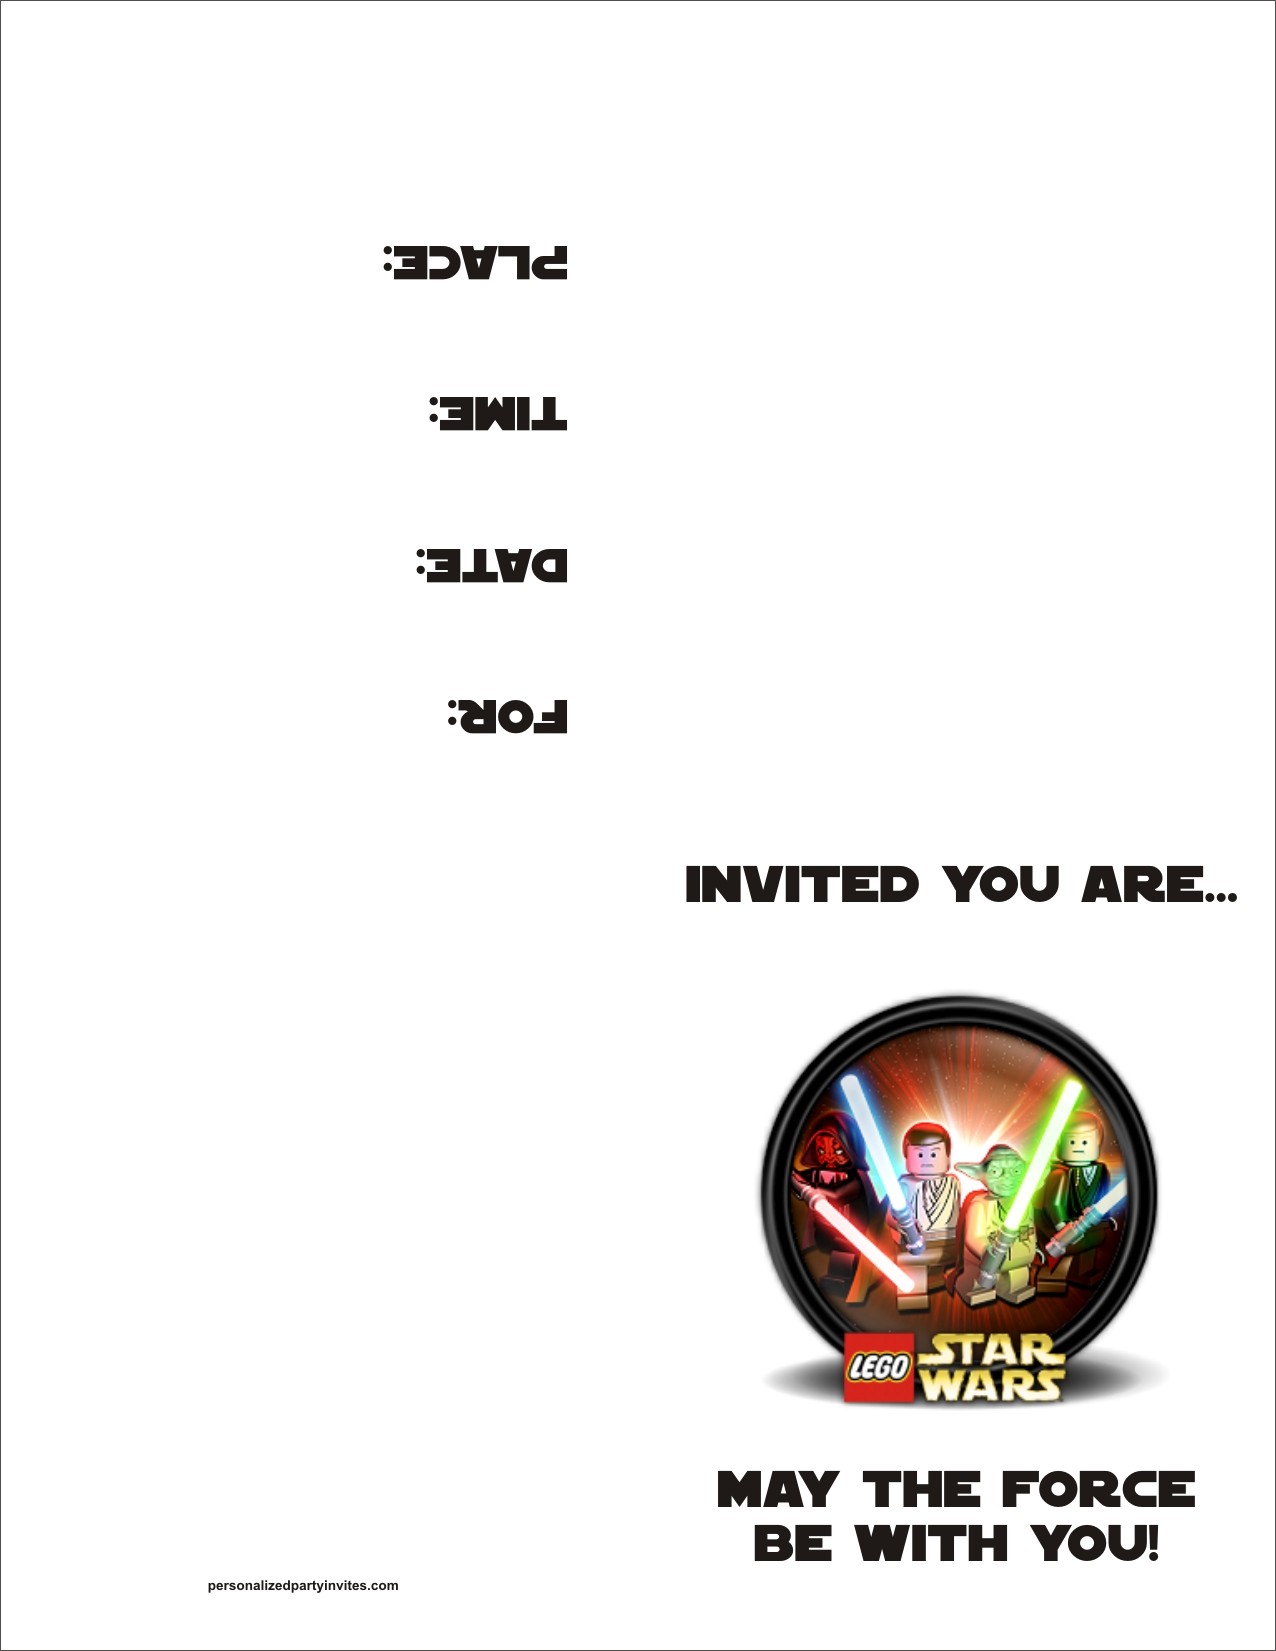 Lego Star Wars Free Printable Birthday Party Invitation Personalized Party Invites